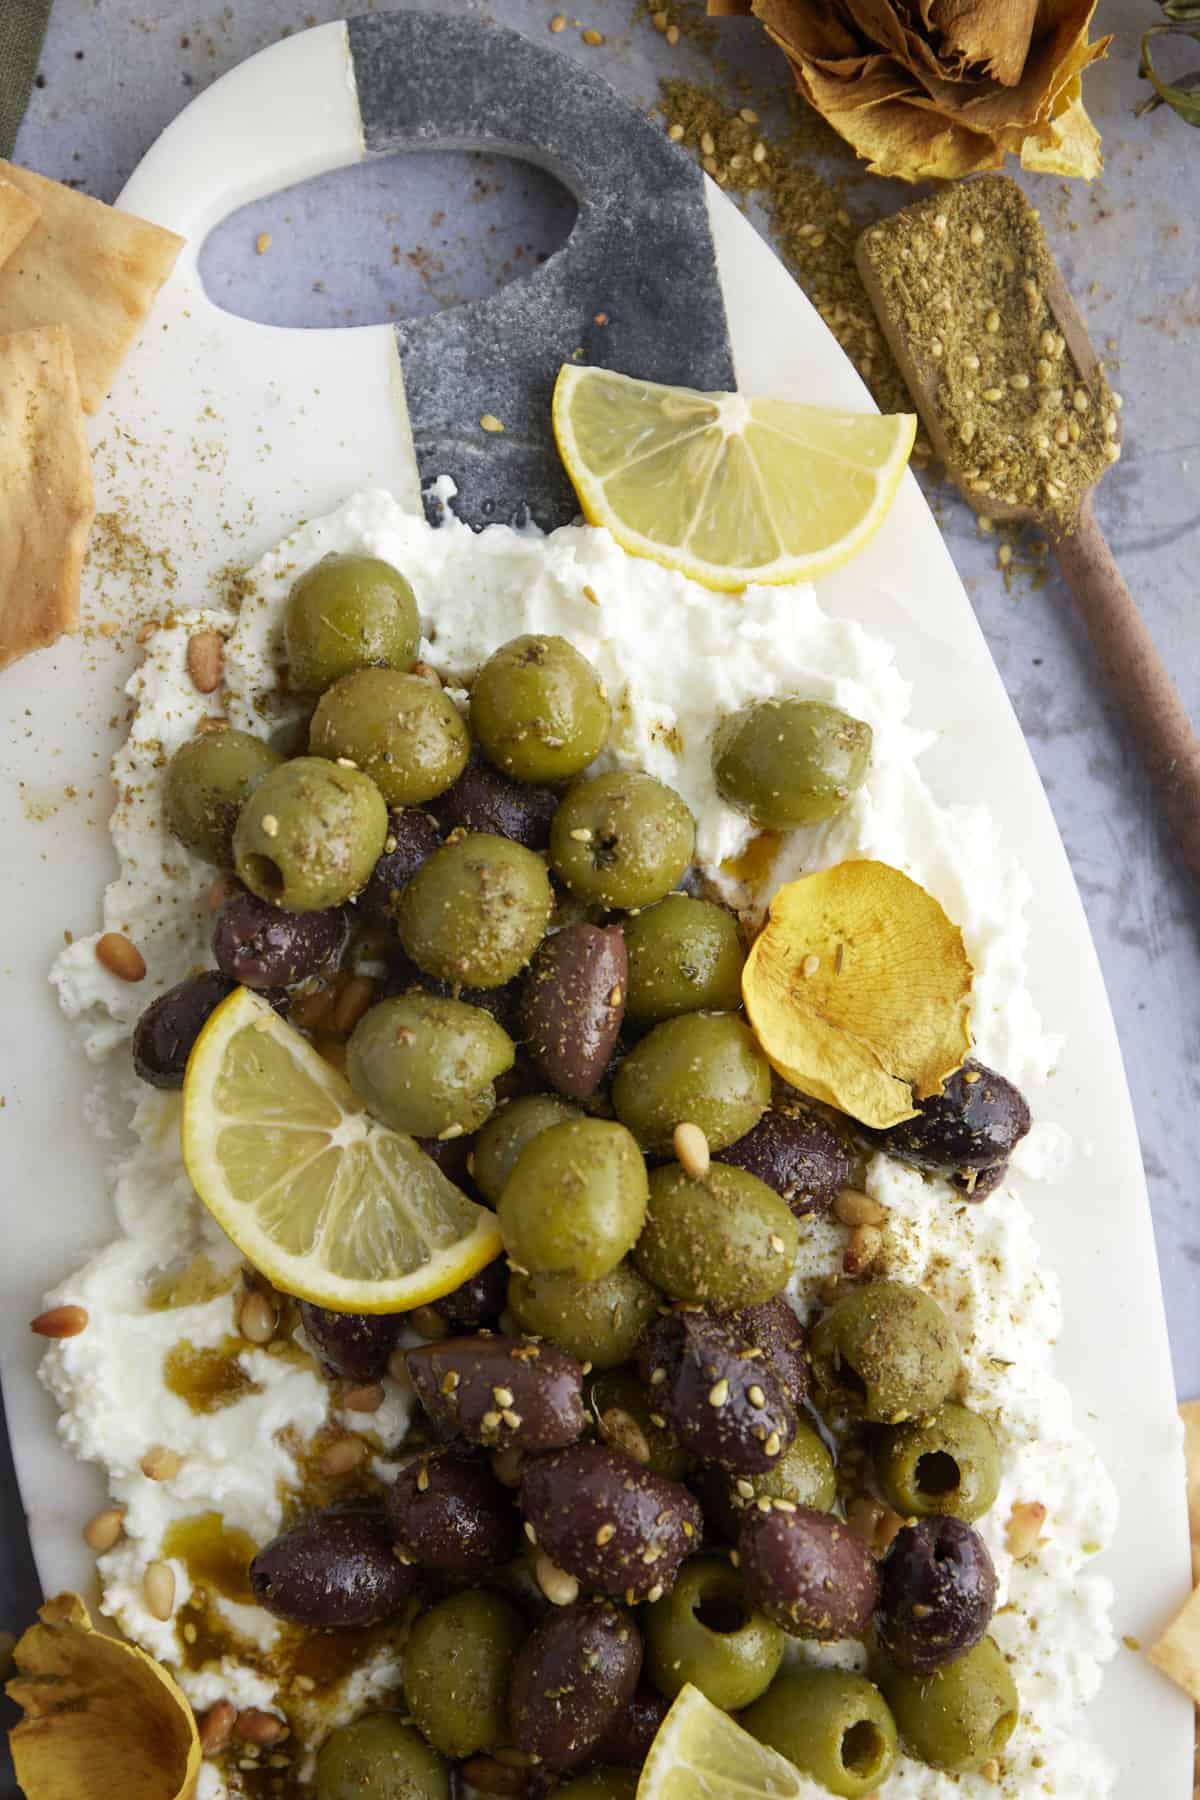 feta board topped with marinated olives.